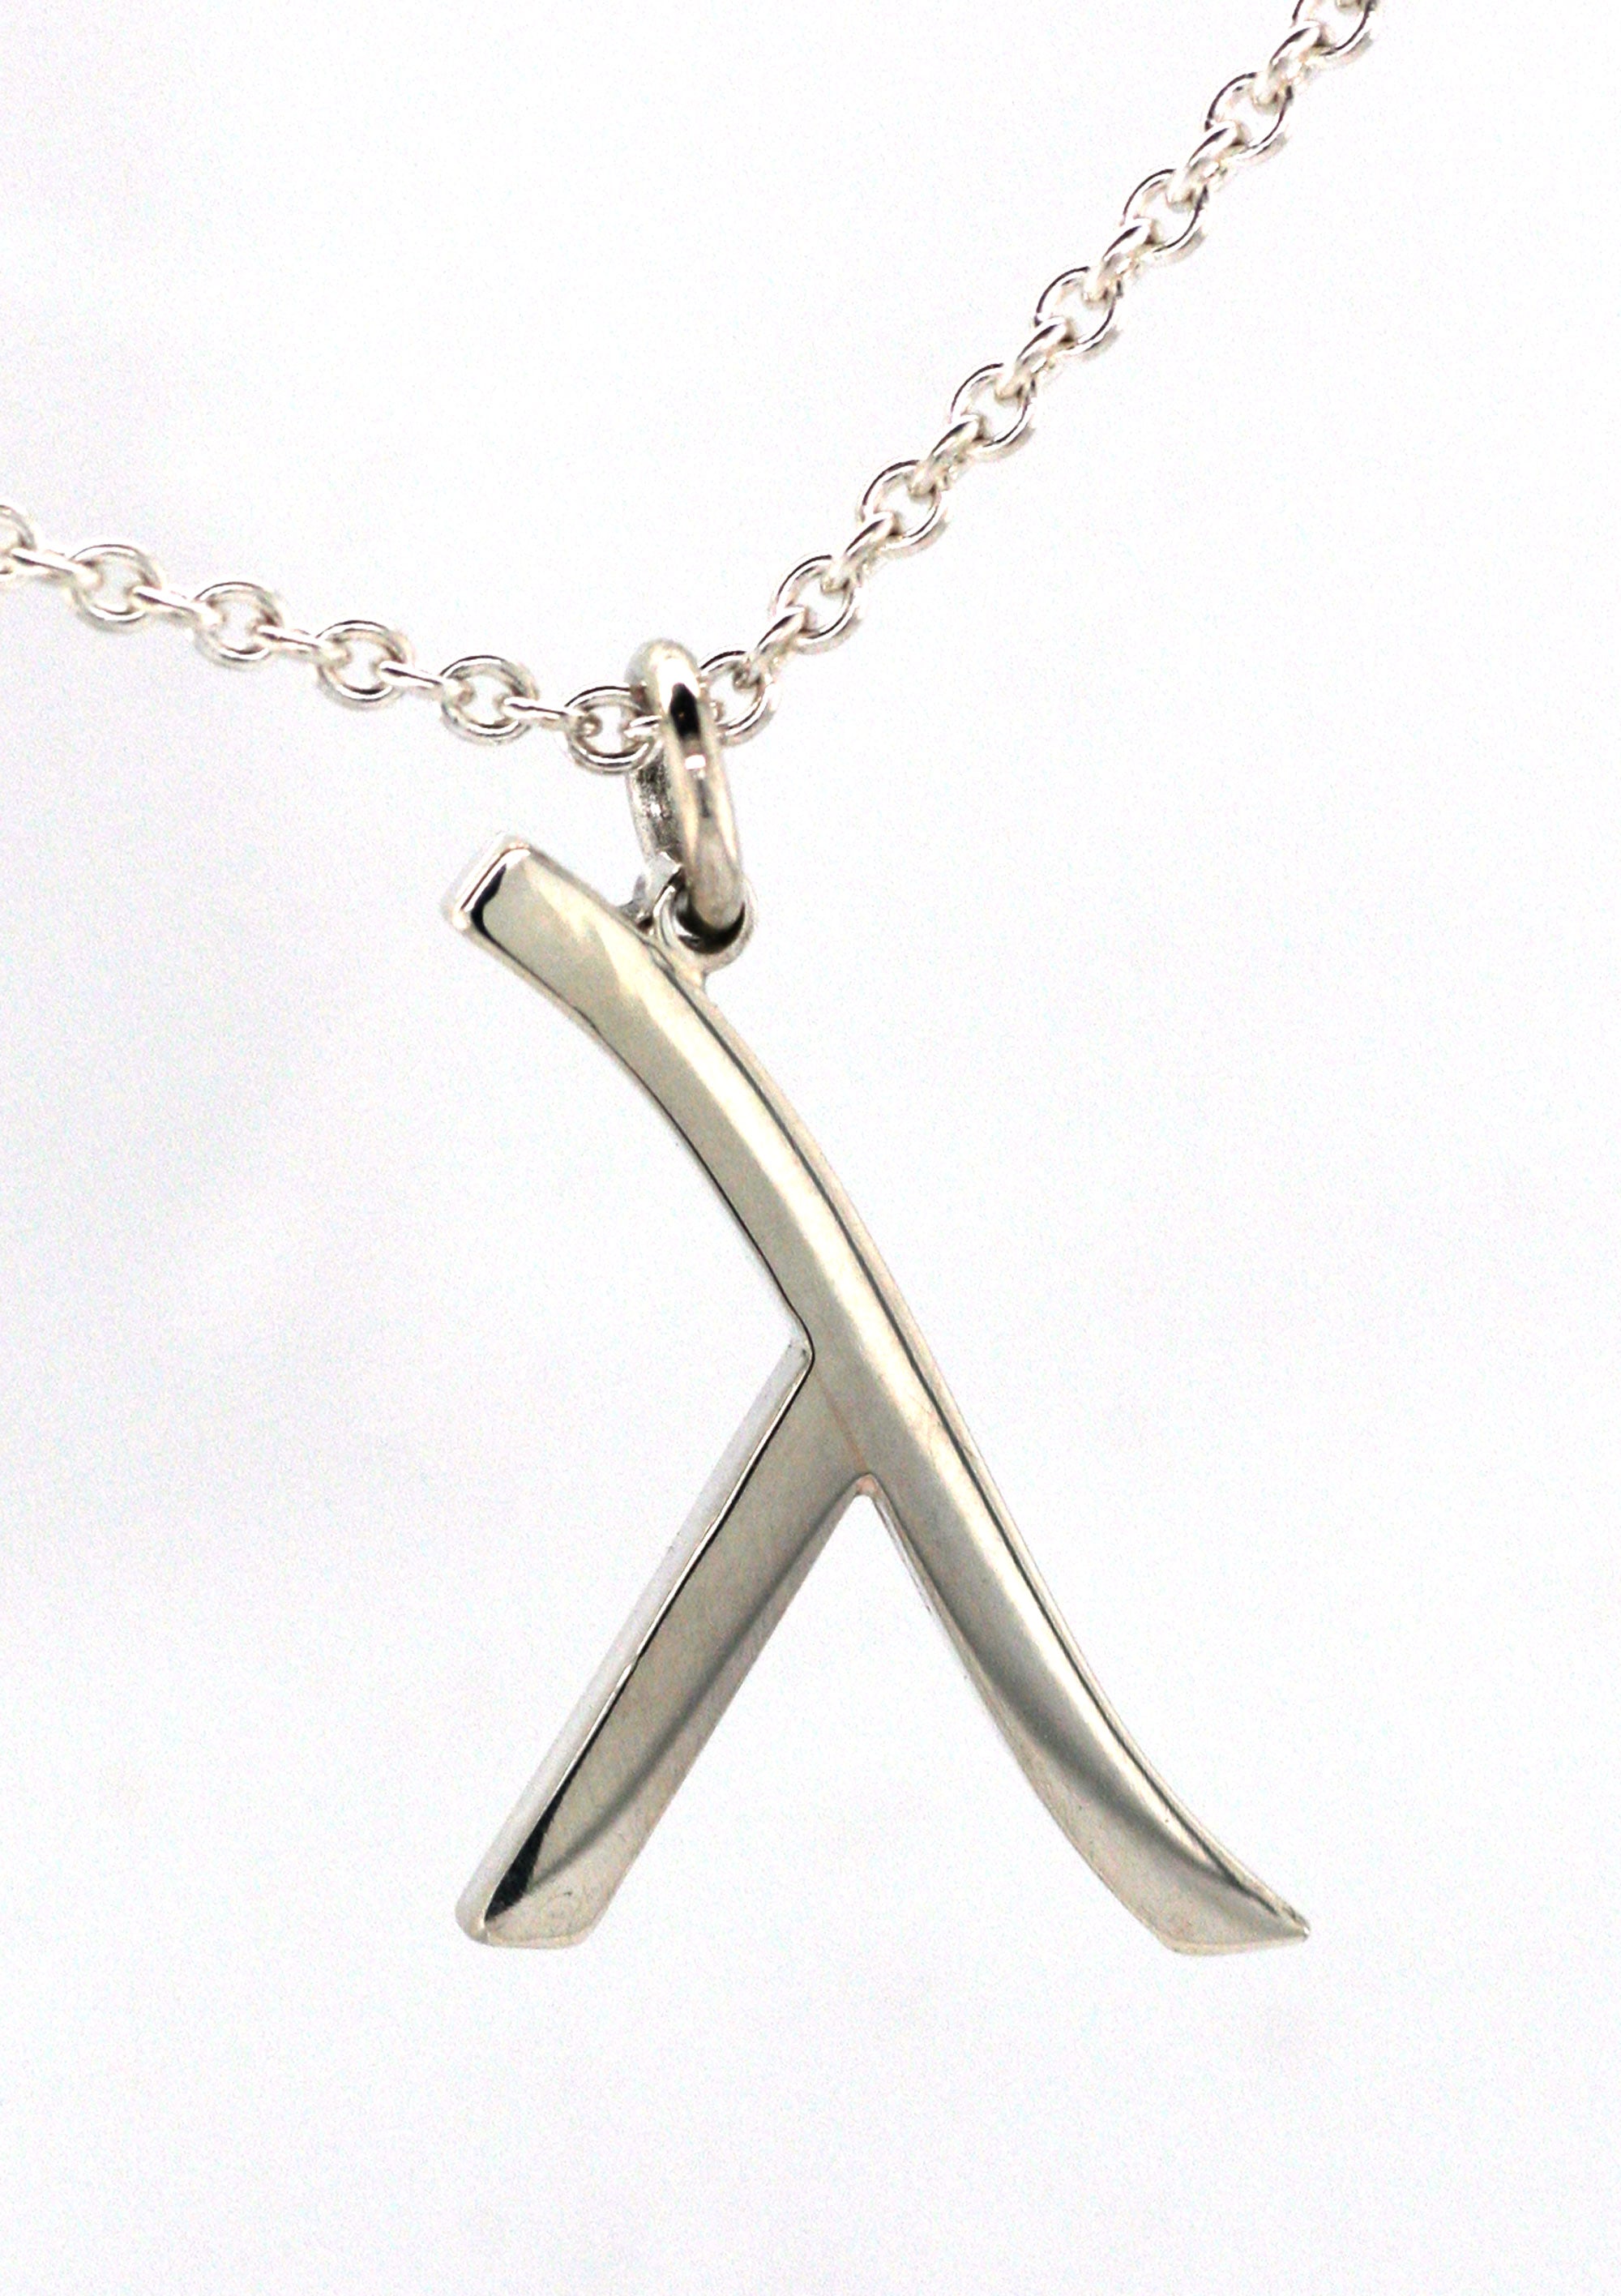 Lambda Necklace, Sterling Silver, Gay Pride, Lesbian Necklace, LGBT, Equality, Gift for Him, Gift for Her